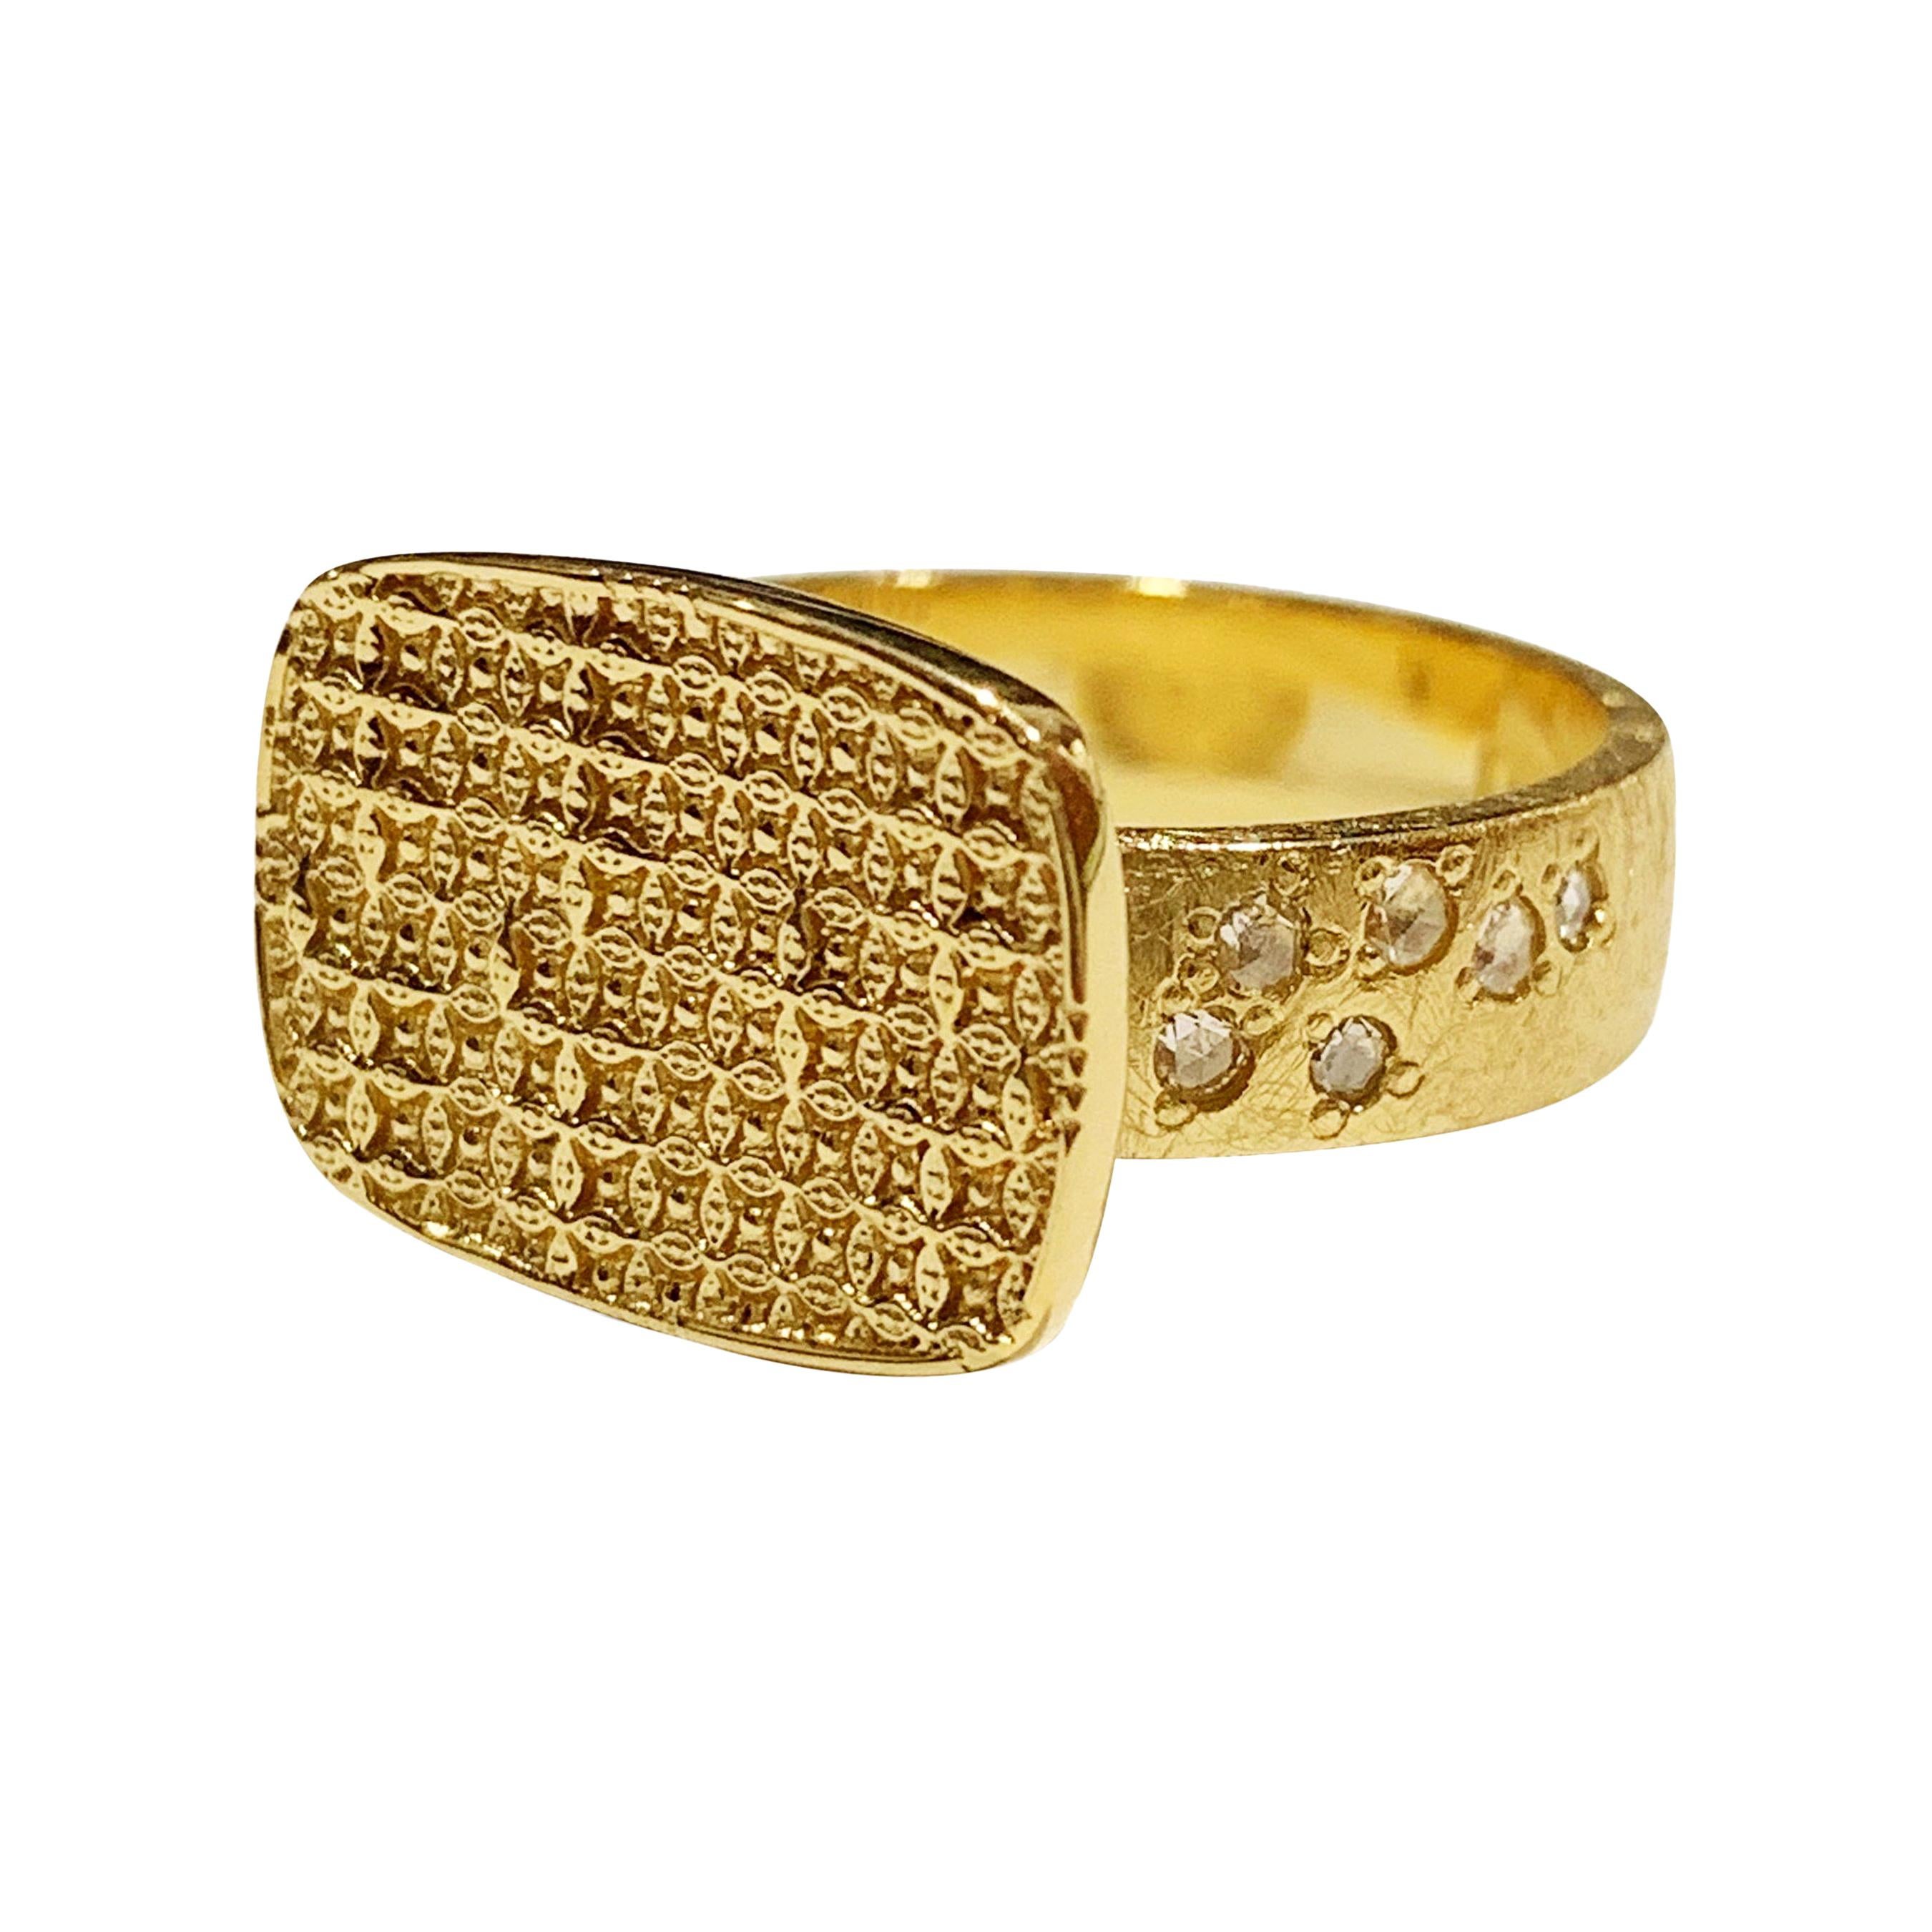 Luca Jouel Rose Cut Diamond Antique Patterned Statement Ring in 18 Carat Gold For Sale